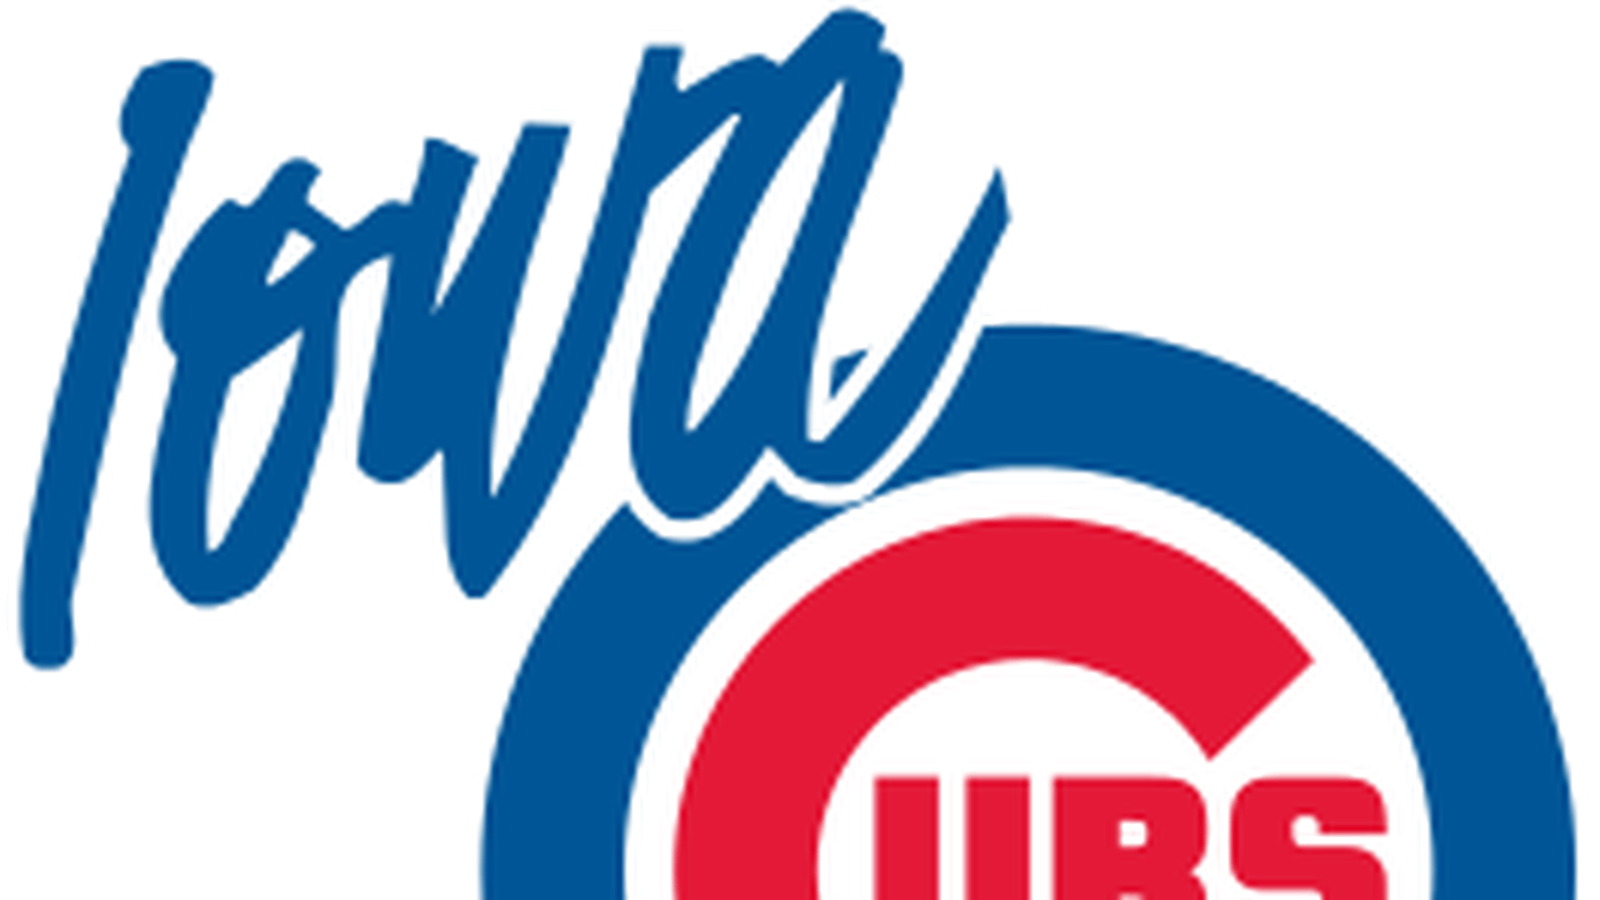 Iowa Cubs Logo - Get To Know The Iowa Cubs - Bleed Cubbie Blue